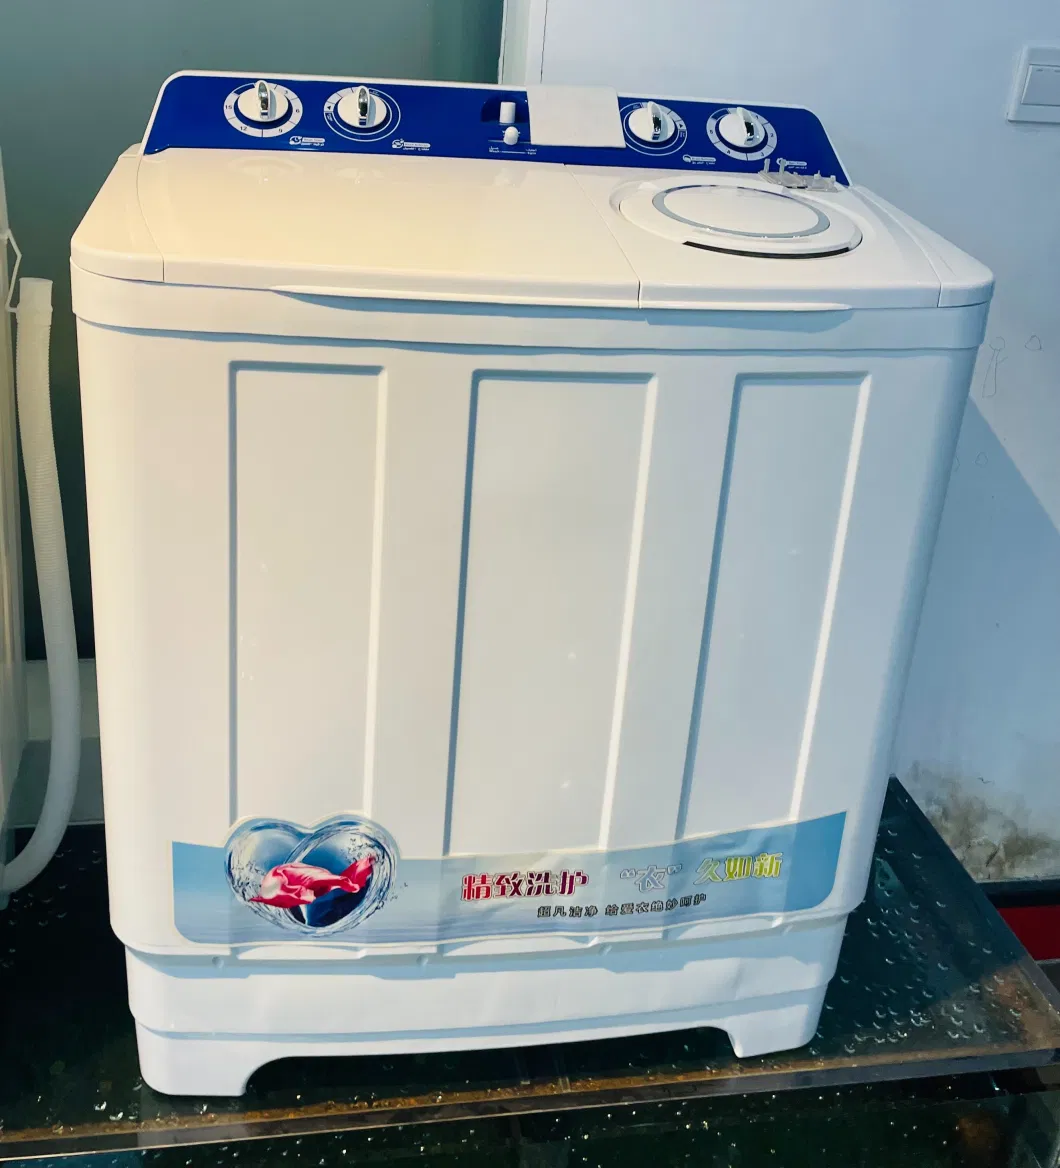 Xpb130-P-9 13kg Manufacturer OEM ODM Smart Plastic Twin Tub Semi-Automatic Aluminum/Copper Motor Drying Cleaning Washing Machine with Rust Proof Body